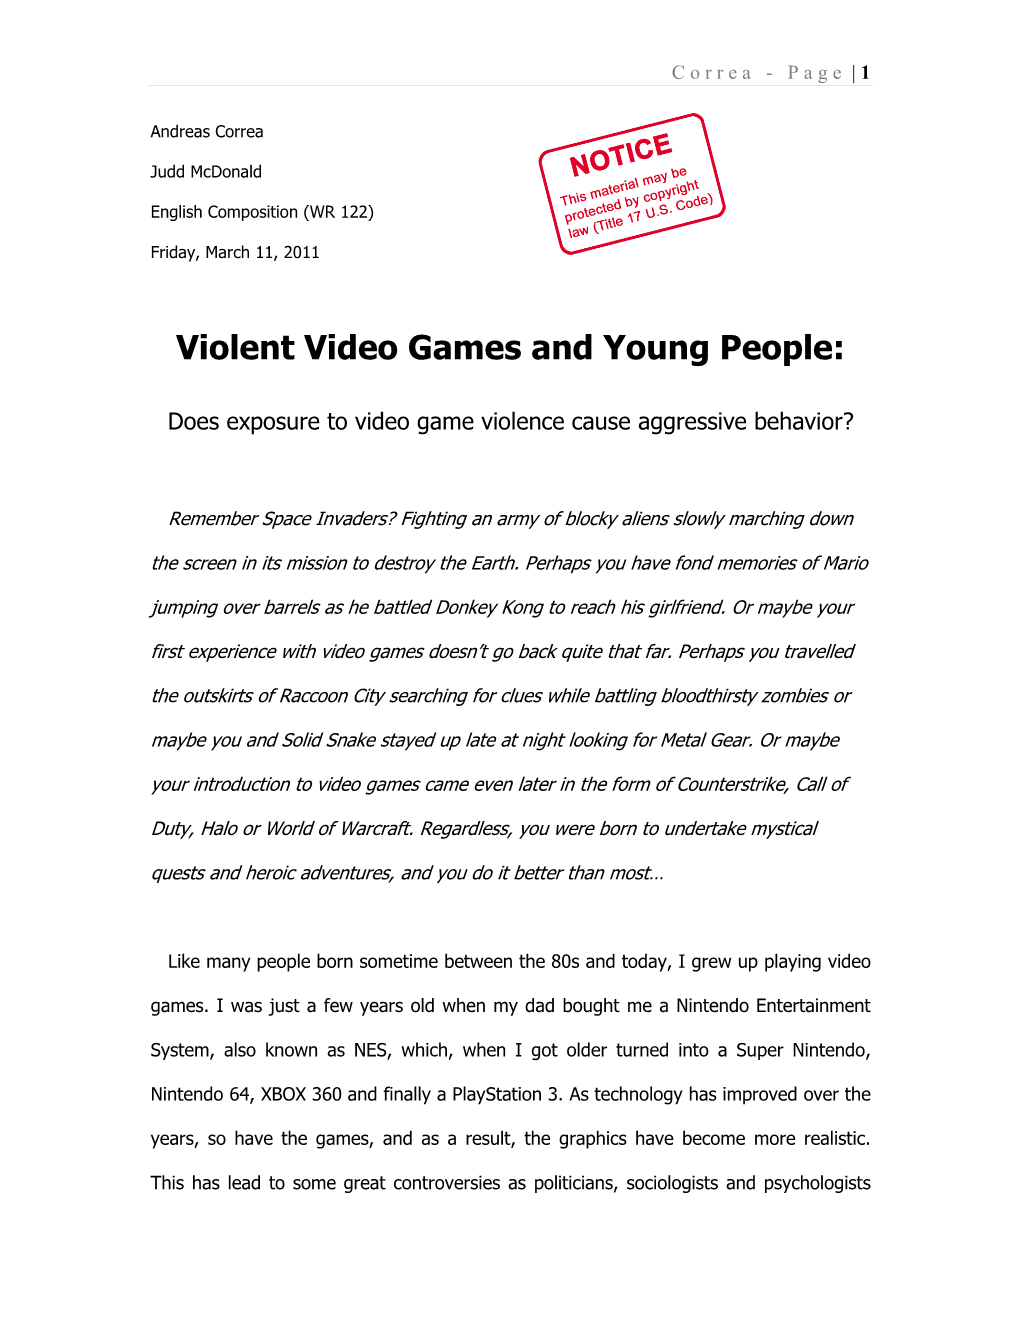 Violent Video Games and Young People